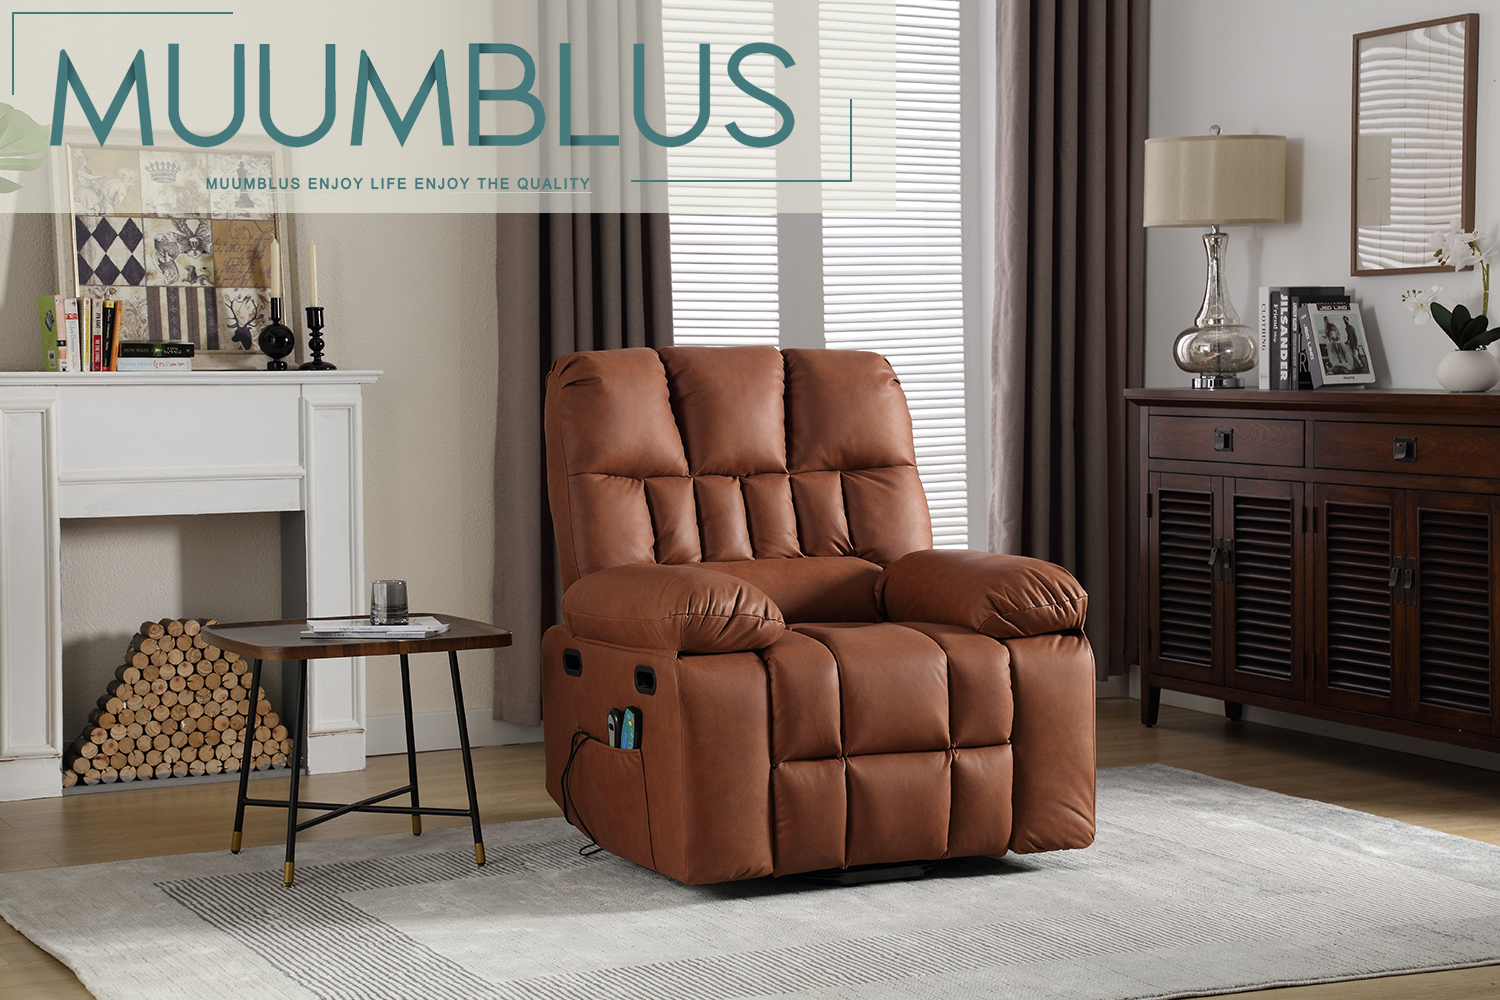 Muumblus Oversize Power Lift Recliner Chair Recliners for Elderly, Heat and Massage, PU Leather Sofa Chair for Living Room Bedroom, Light Brown - image 2 of 9